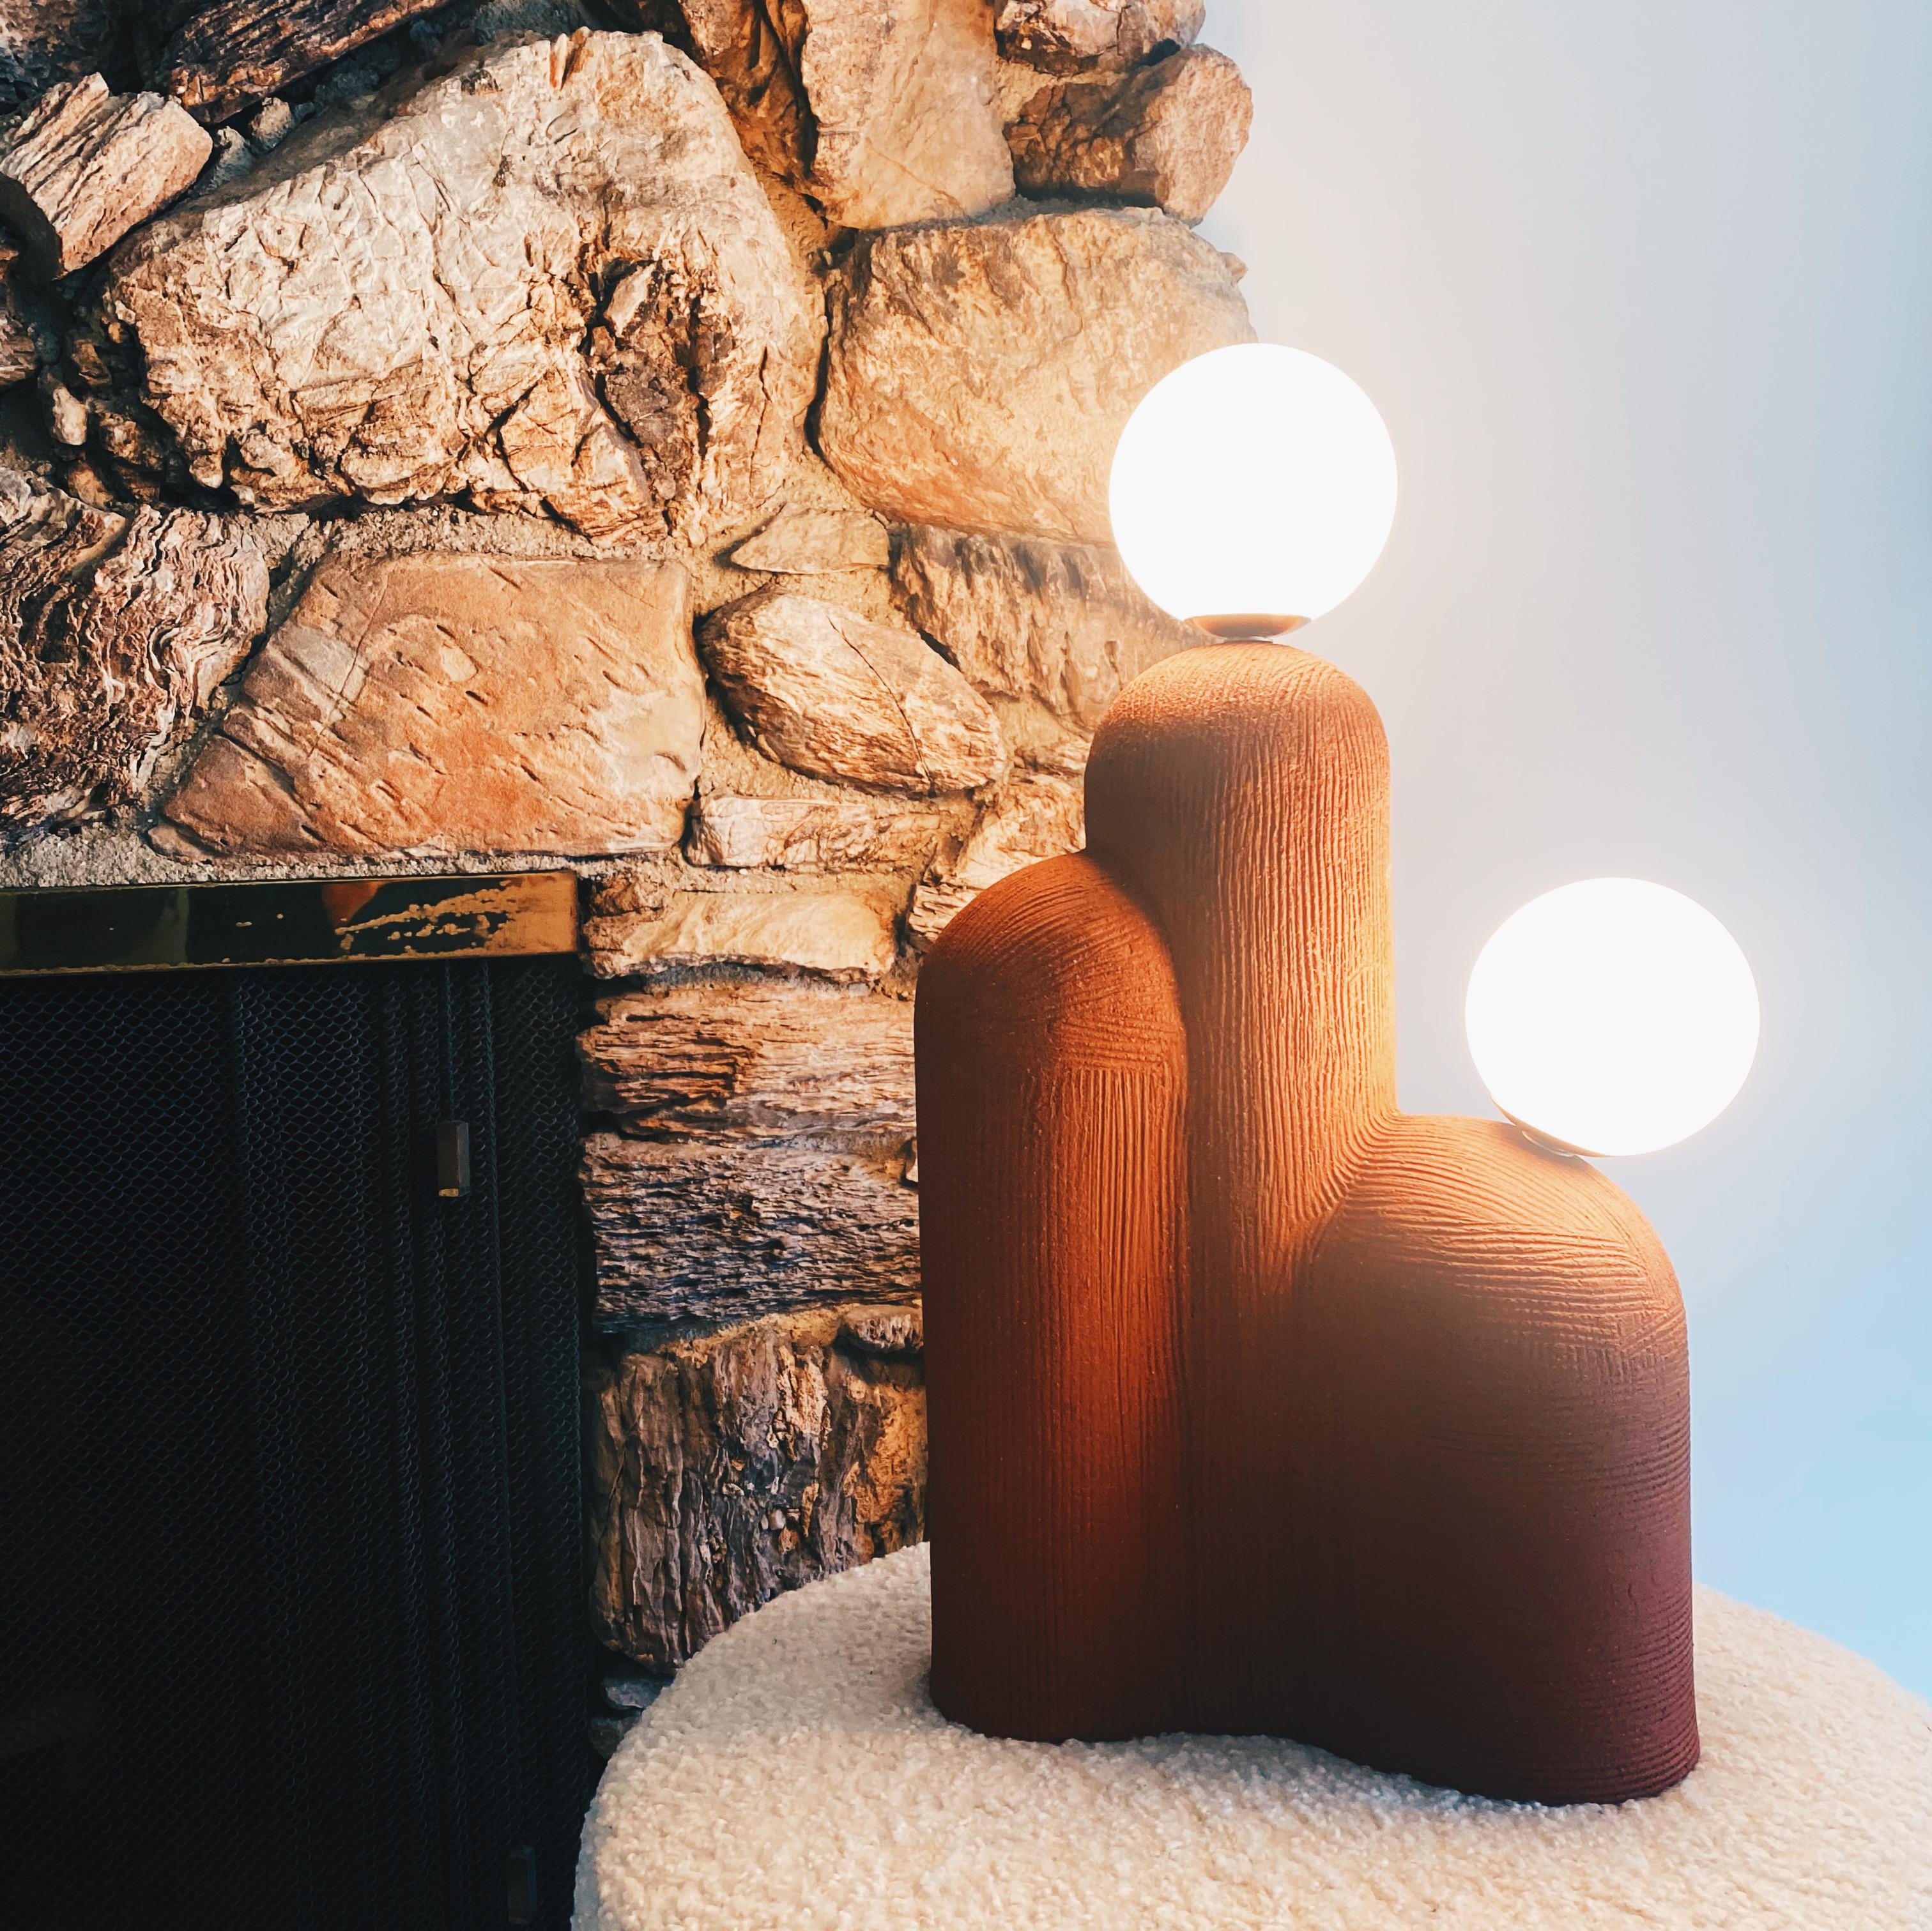 Terra Cotta cylinder lamp by Olivia Cognet
Materials: Ceramic.
Dimensions: D 45 x H 50 cm

Since moving to Los Angeles in 2016, French artist and designer Olivia Cognet has focused on ceramics as the fertile medium through which she expresses